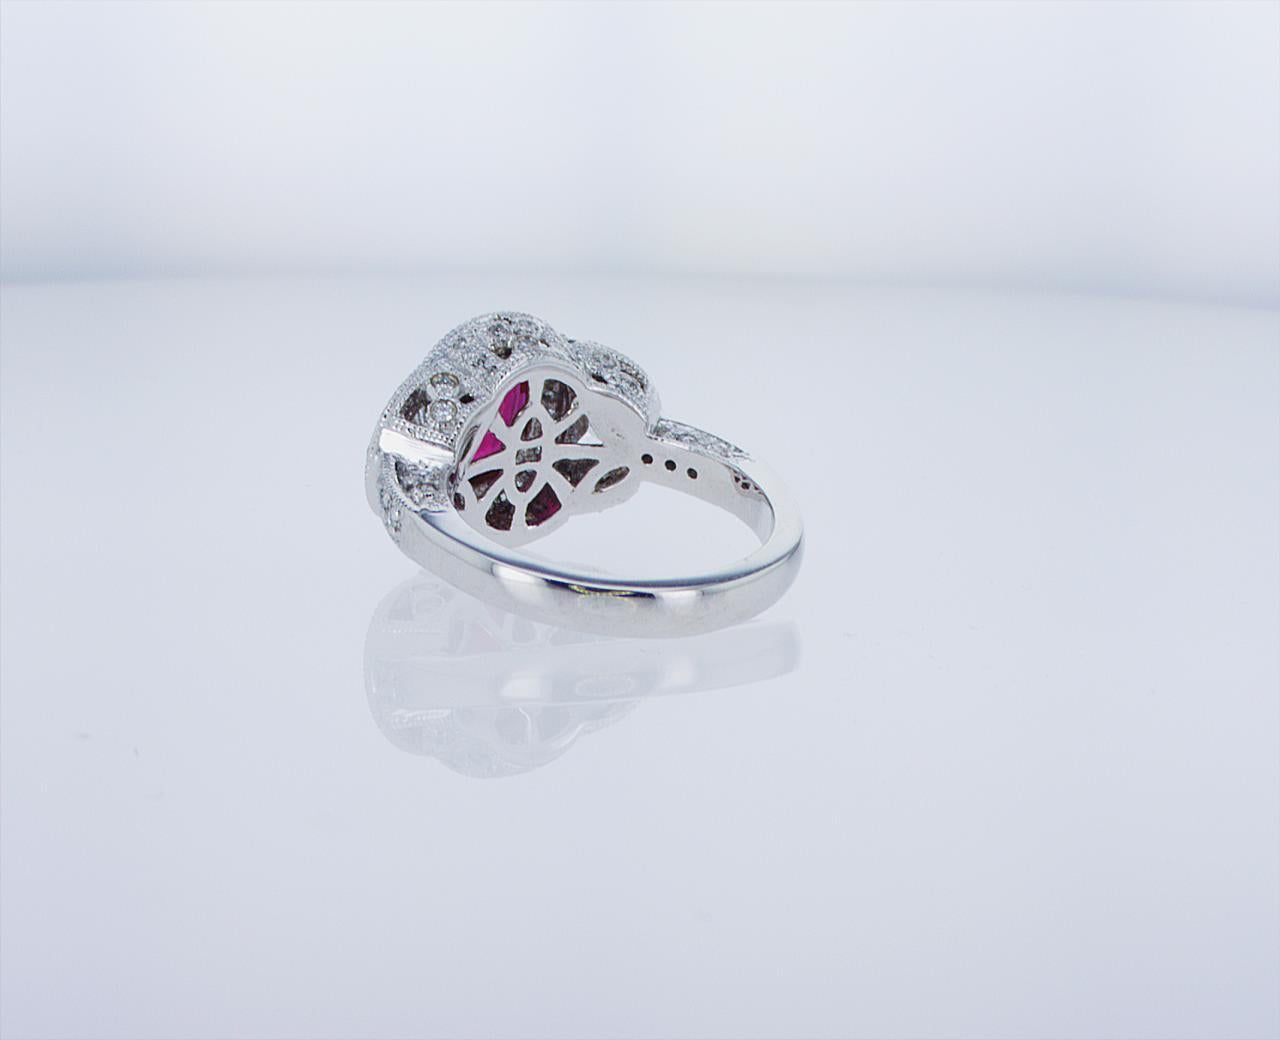 Oval Ruby Cocktail Ring with Half Moon Diamond Accents For Sale 2